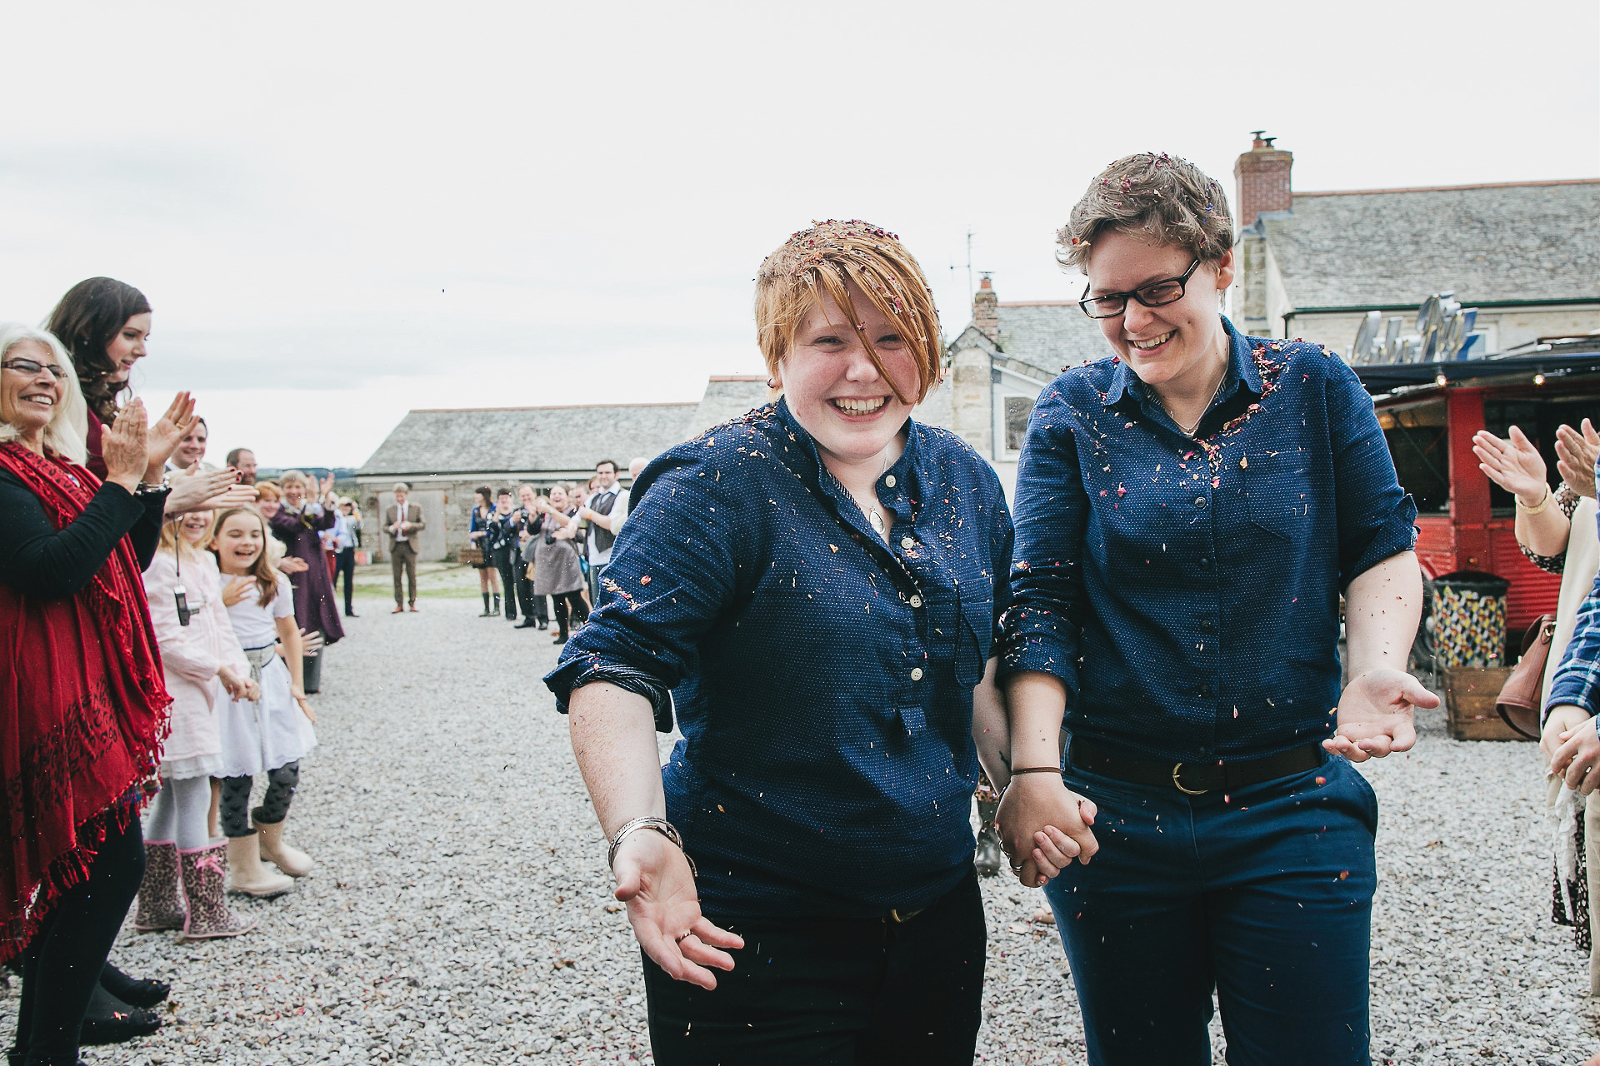 Two smiling brides in blue shirts covered in confetti